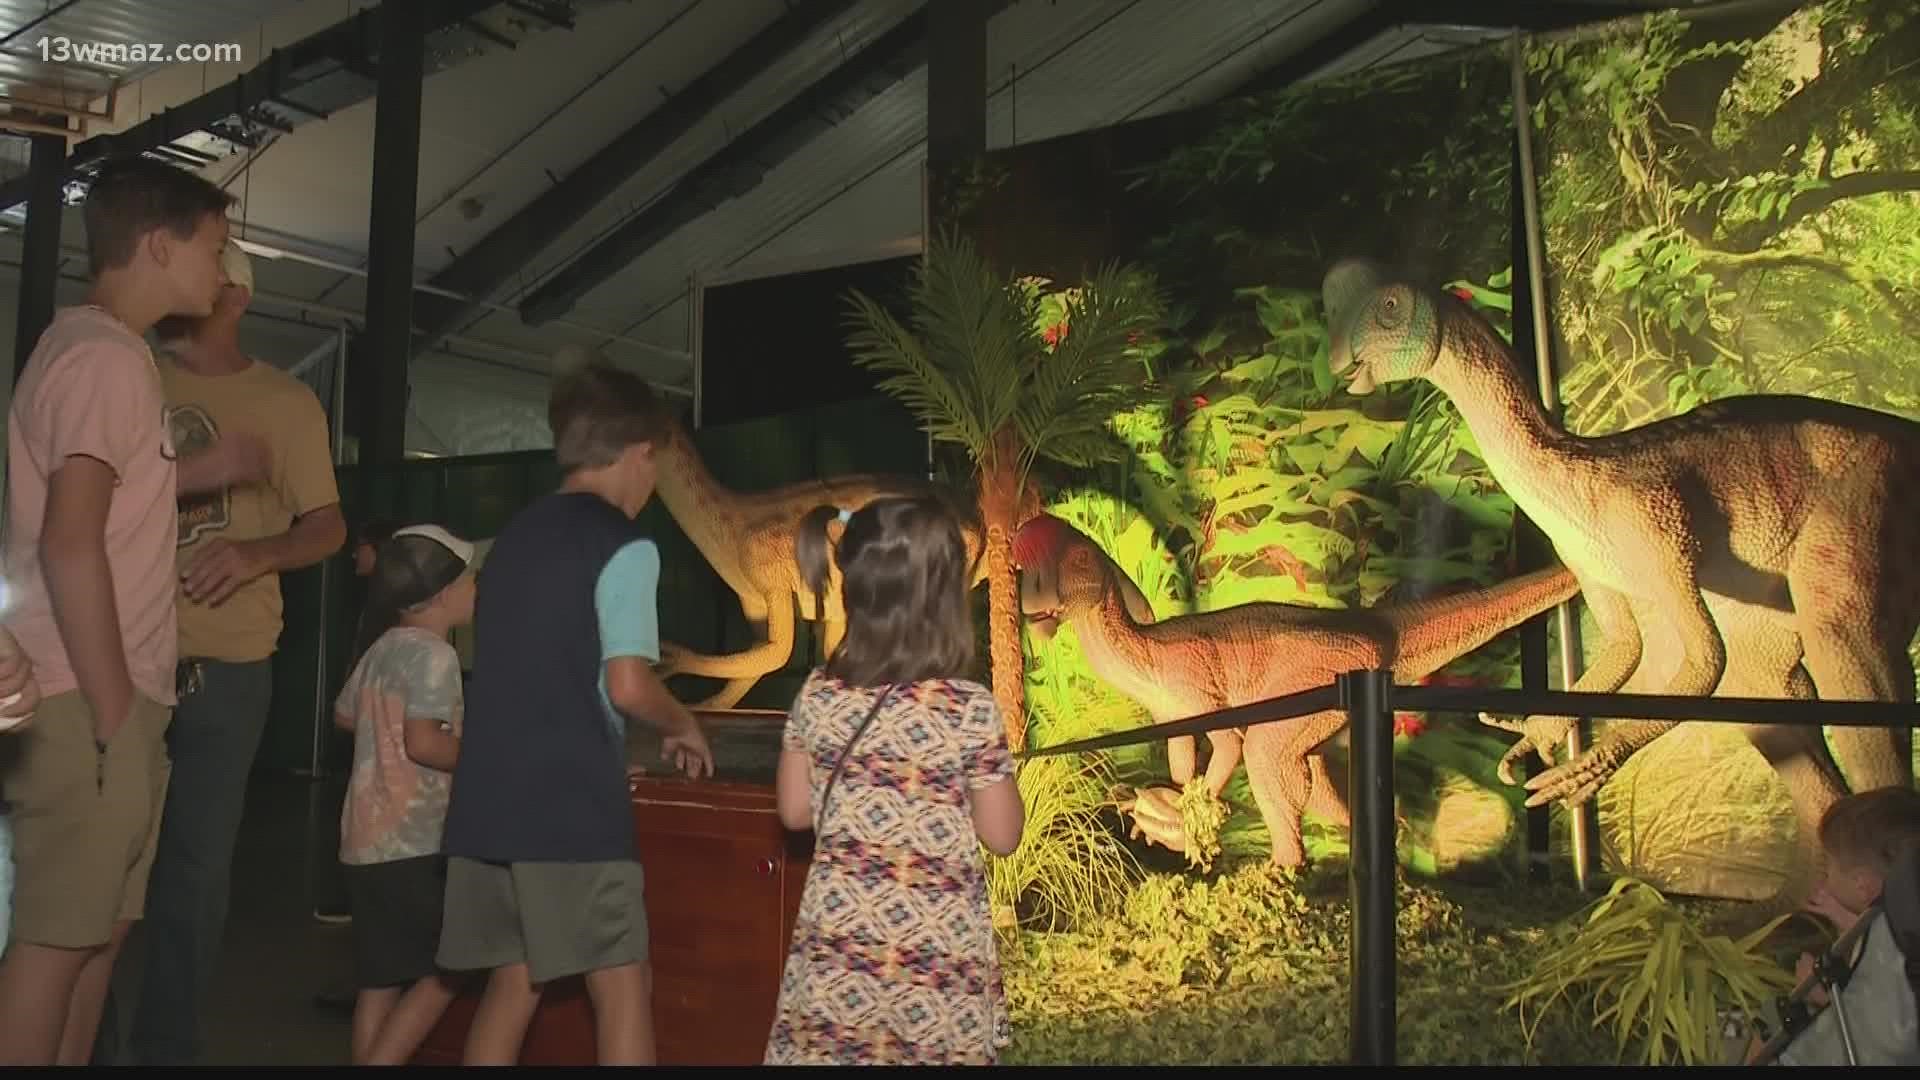 The adventured featured life-sized dinosaurs and a gift shop and play area for children.